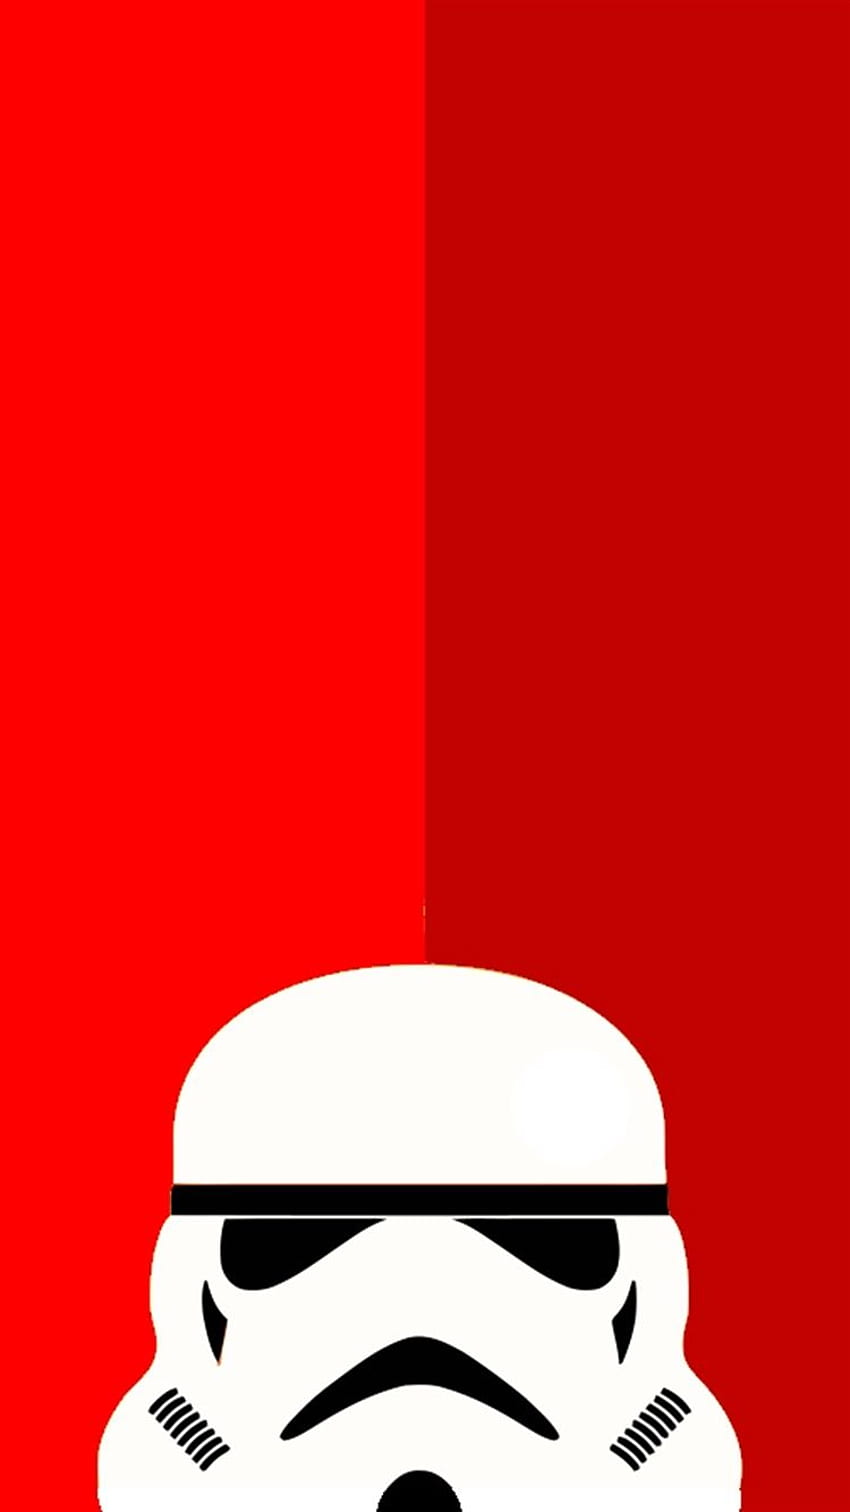 Ƒ↑탭하고 앱을 받으세요! Minimalistic Unicolor Red Art For Geeks Imperial S. 배트맨 바탕화면, 바탕화면 바탕화면, 바탕화면 lol, Red Stormtrooper HD 전화 배경 화면